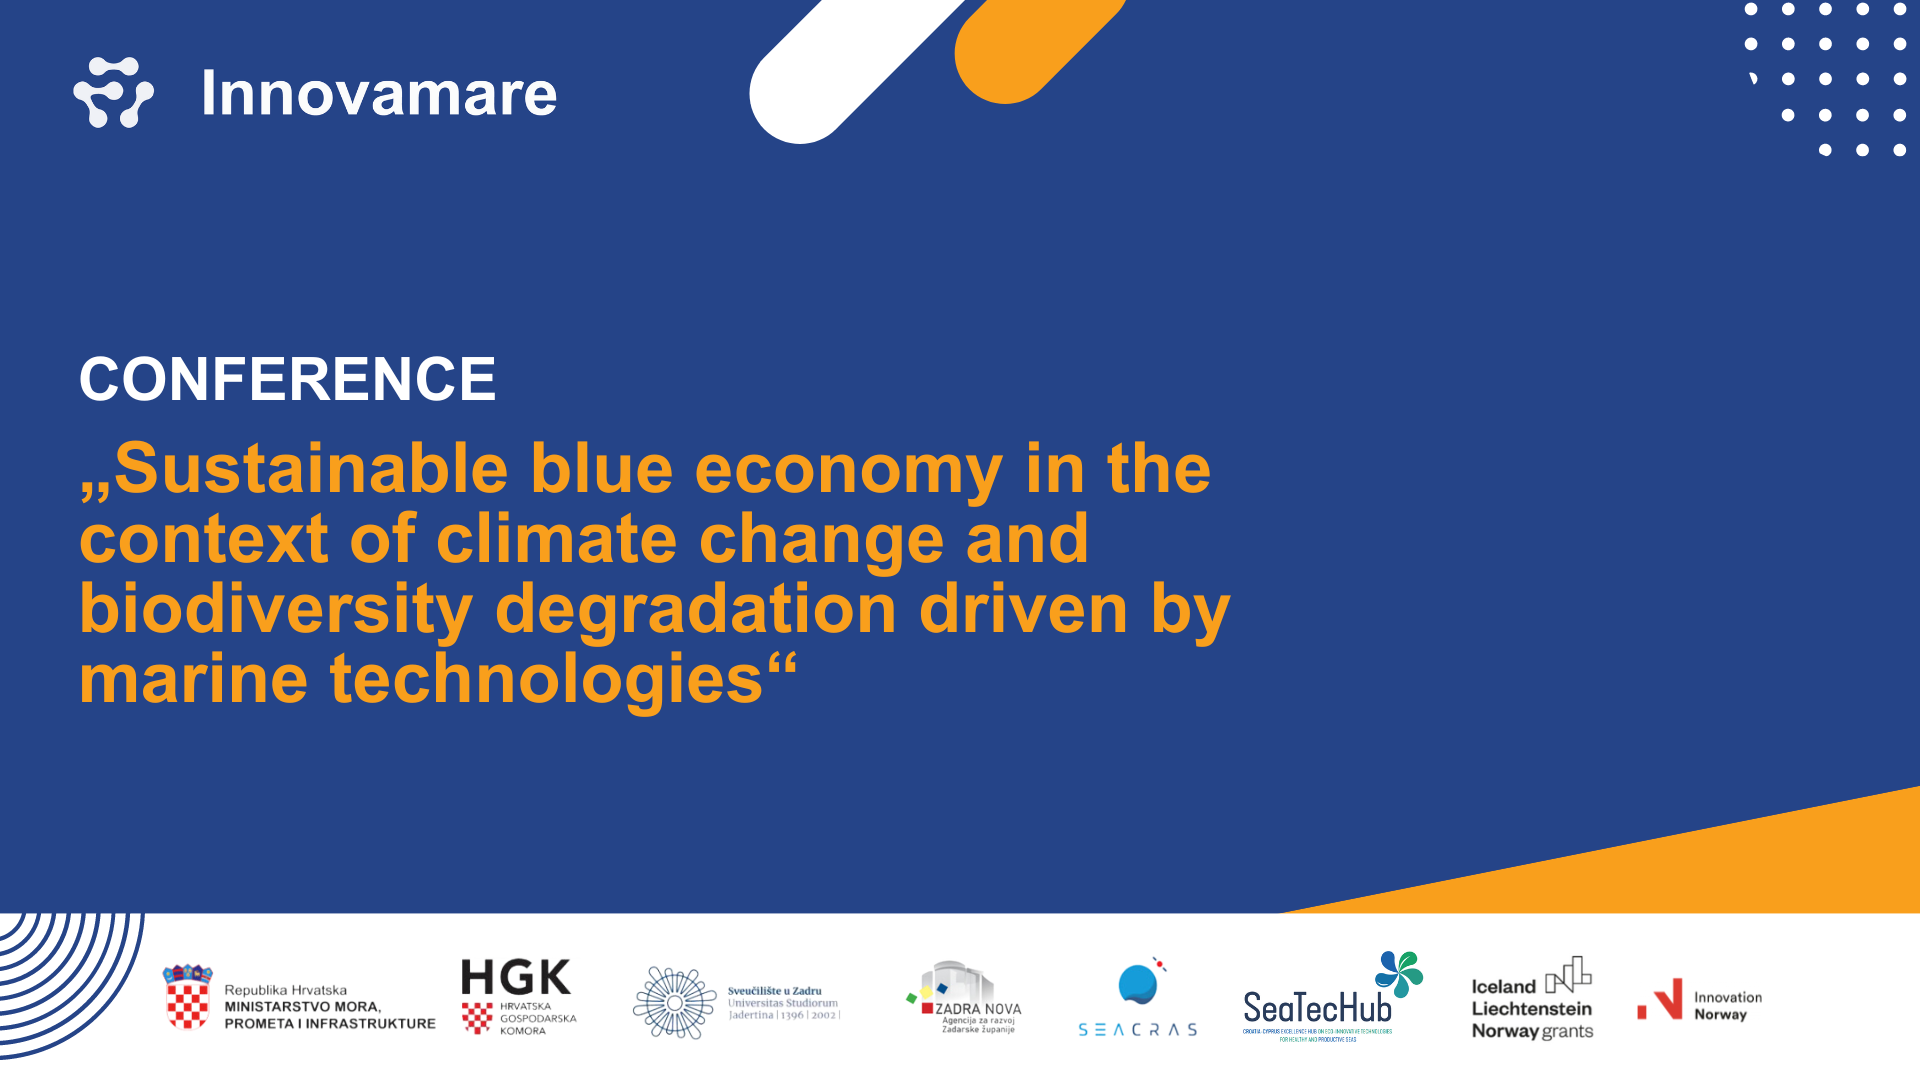 Conference – “Sustainable blue economy in the context of climate change and biodiversity degradation driven by marine technologies”